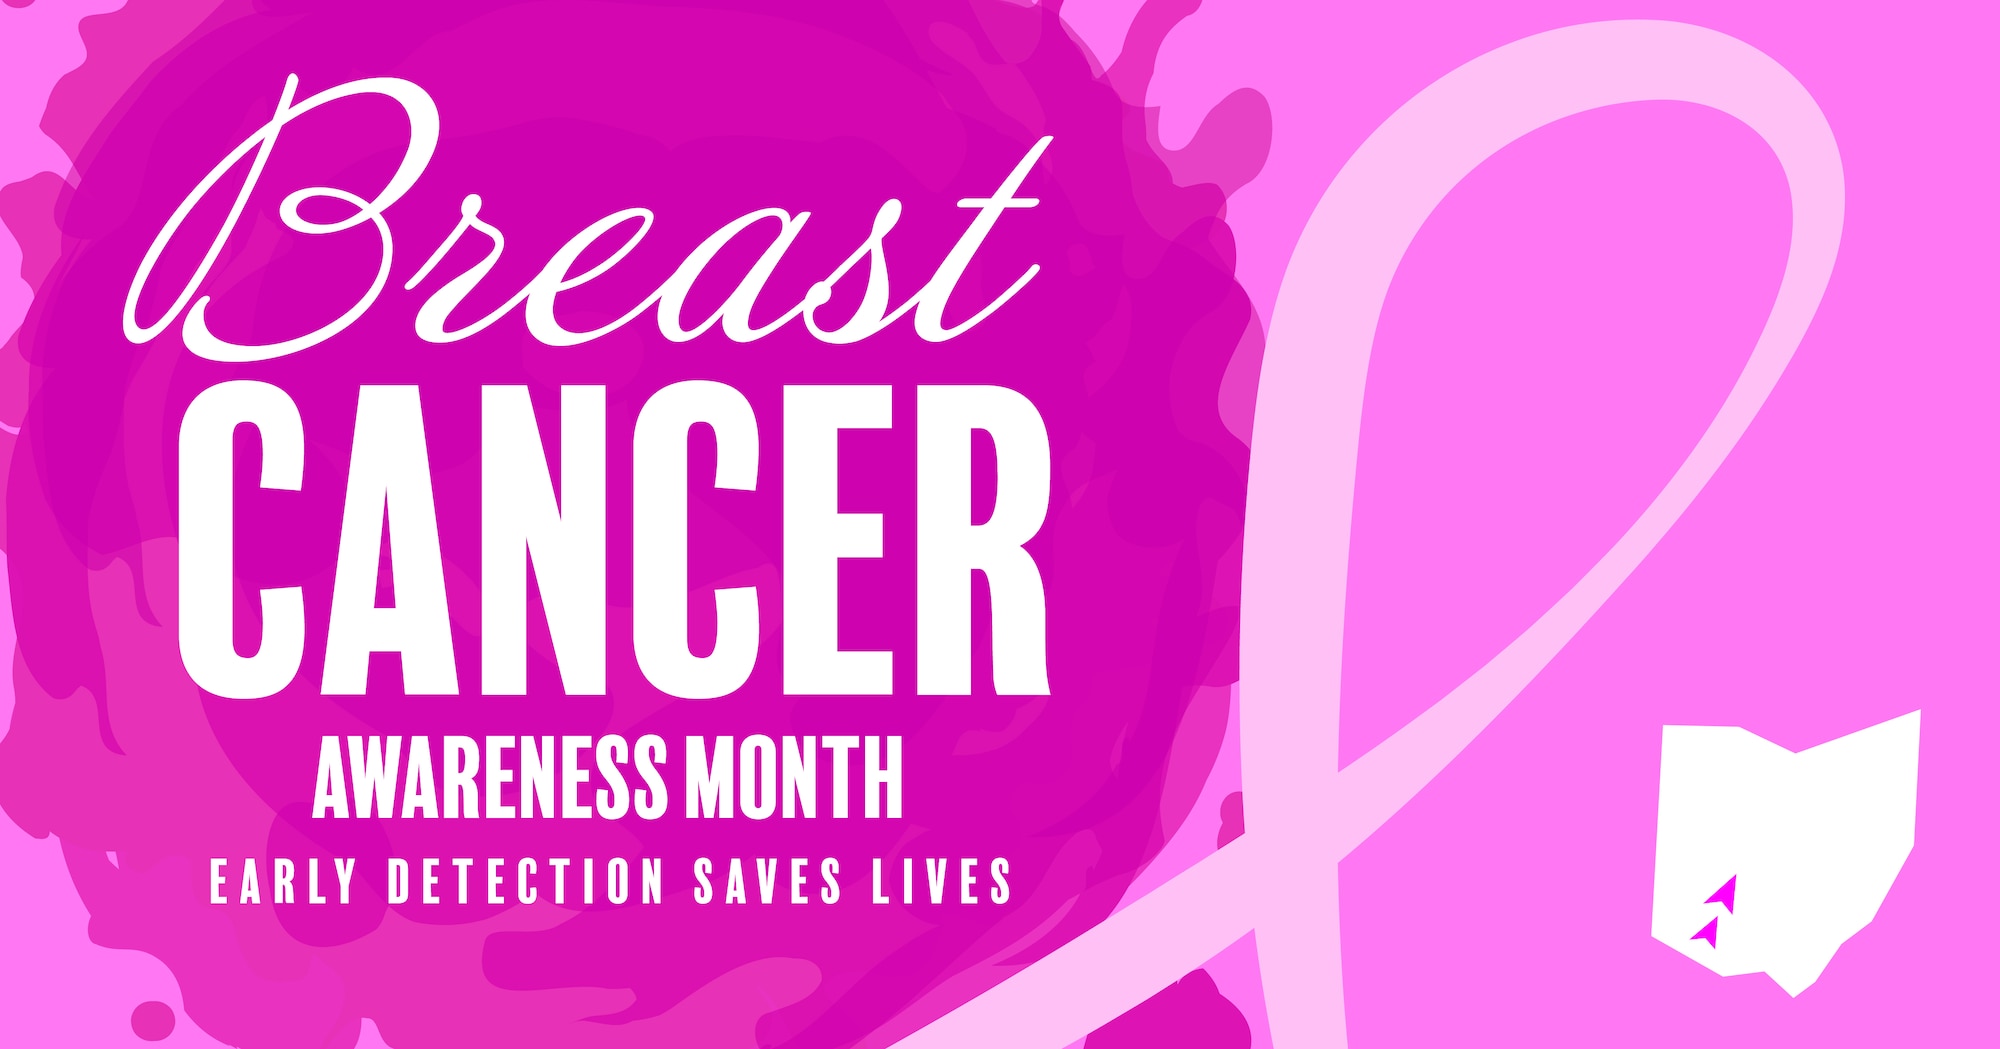 Breast Cancer Awareness Month, Social Media Graphic (U.S Air Force Graphic by David Clingerman)